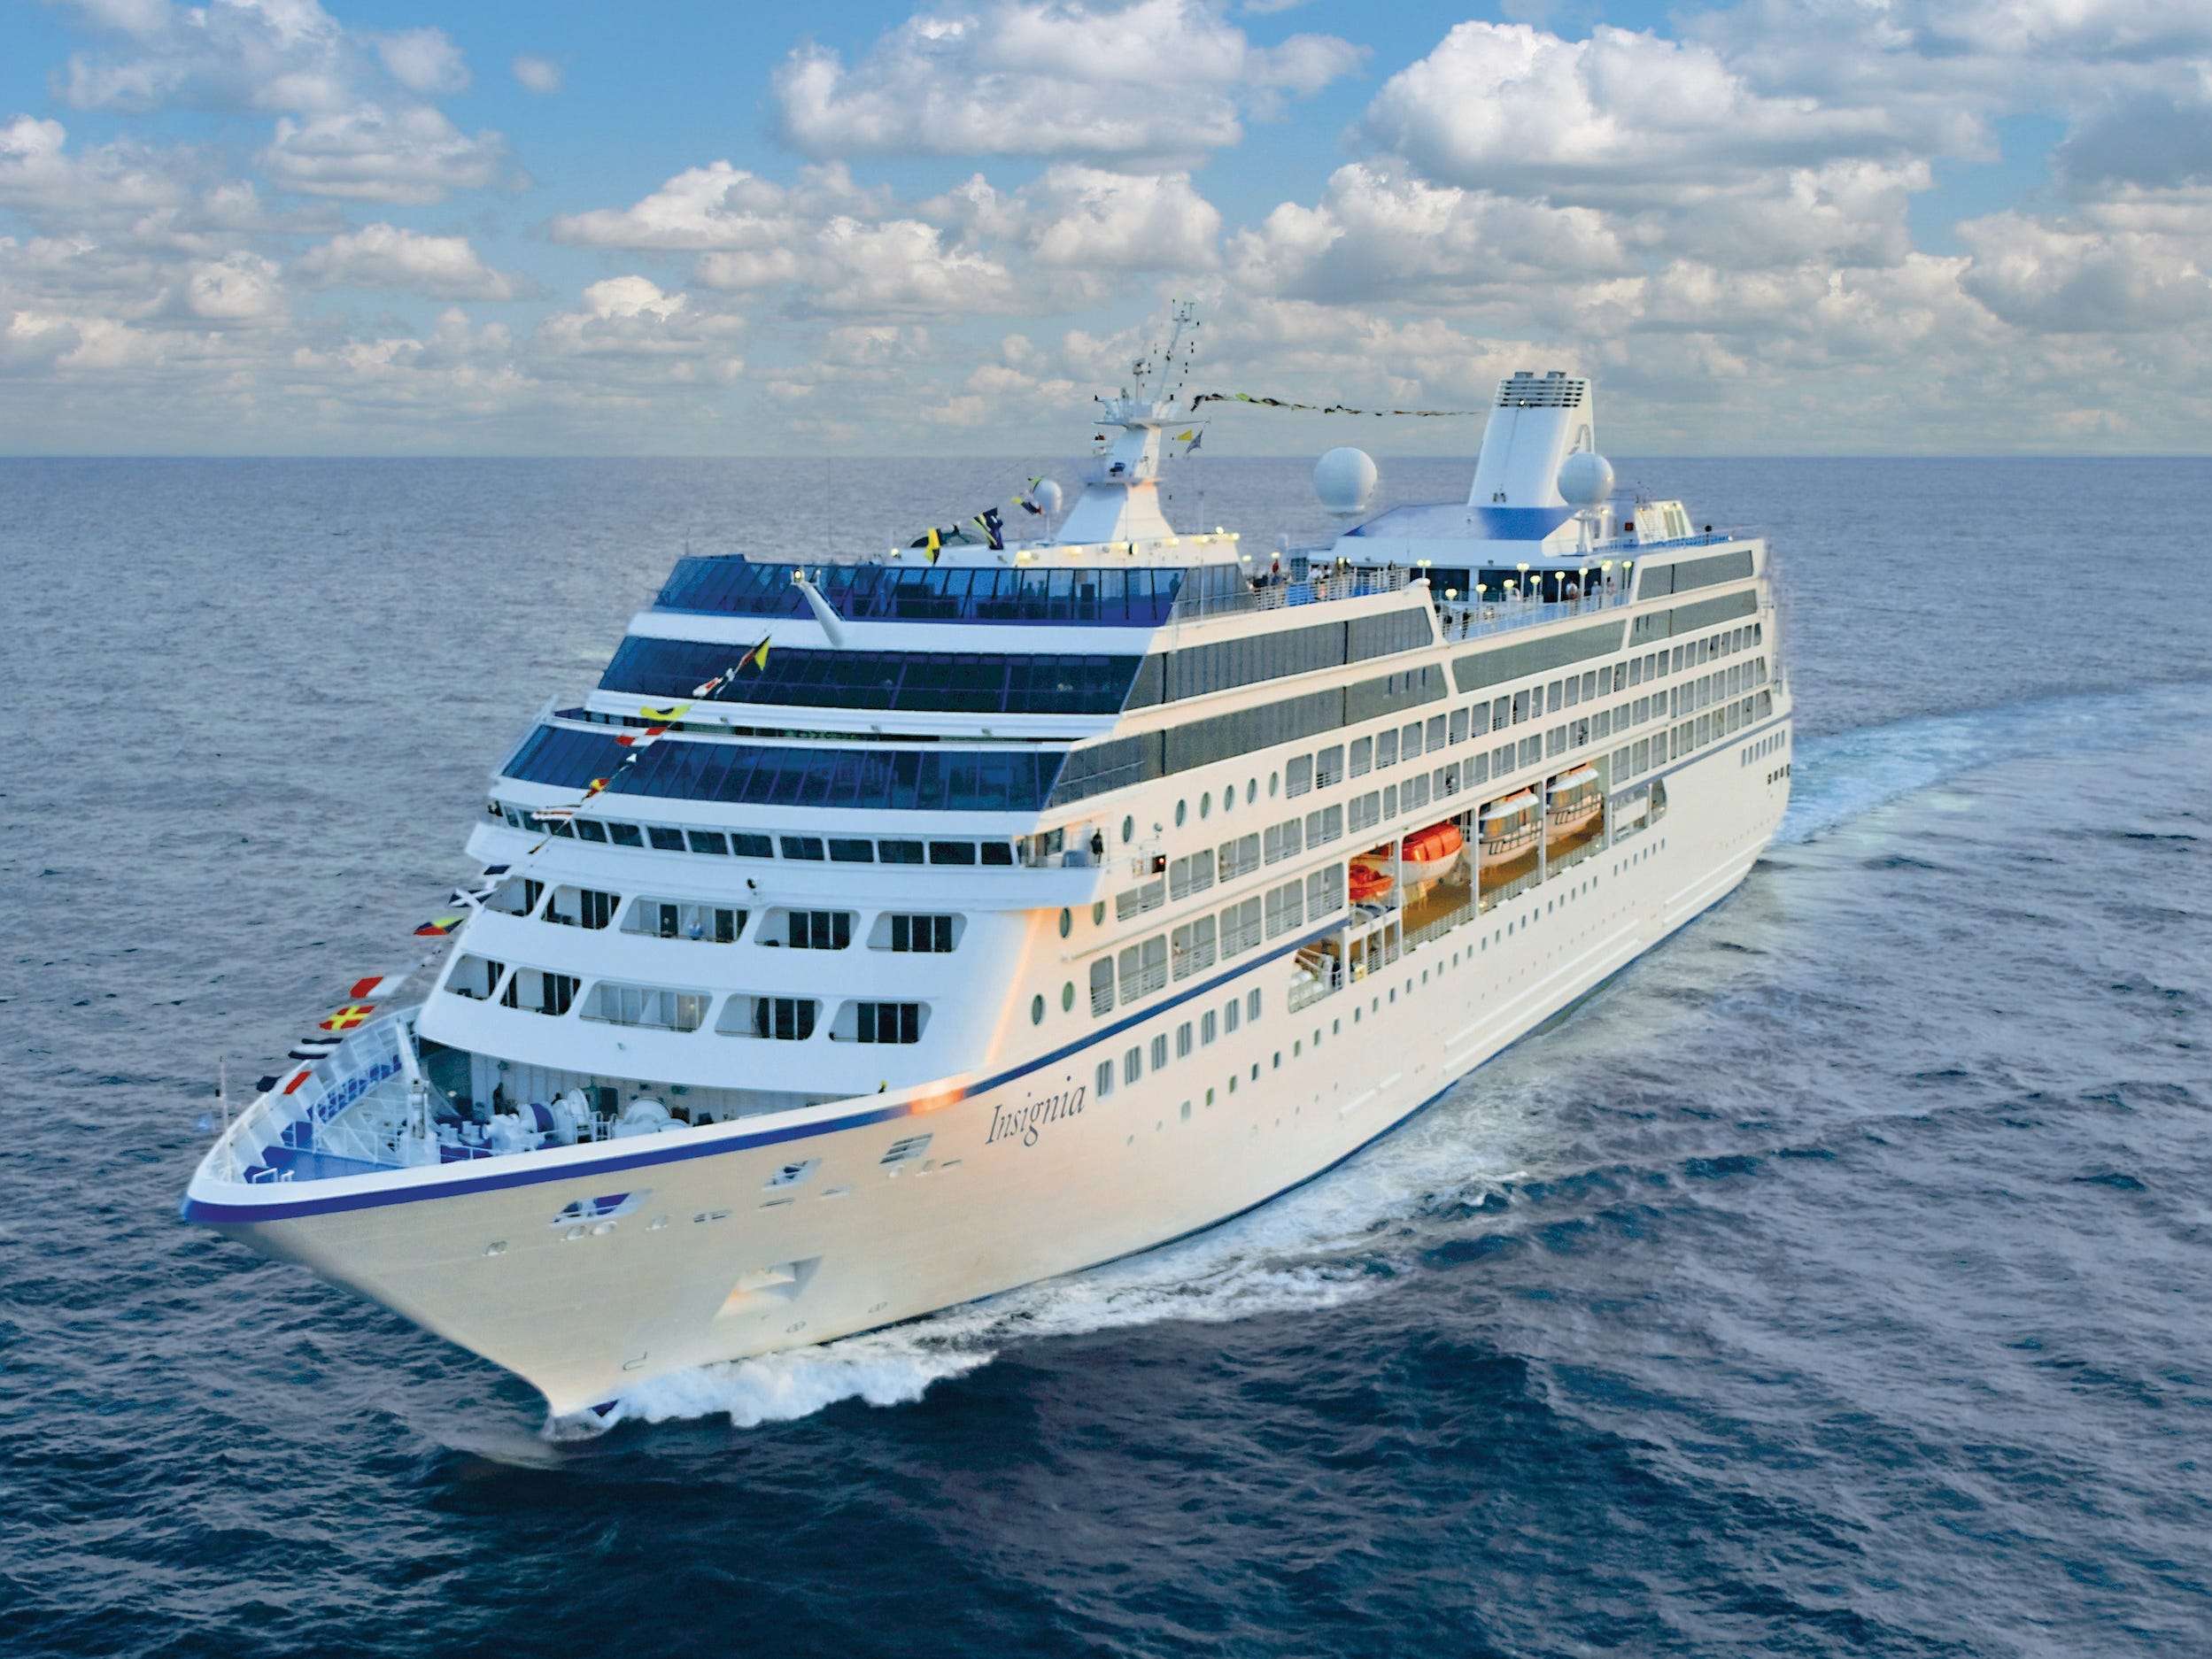 A cruise line just announced it saw its biggest booking day ever after unveiling its 2022 to 2023 winter sailings